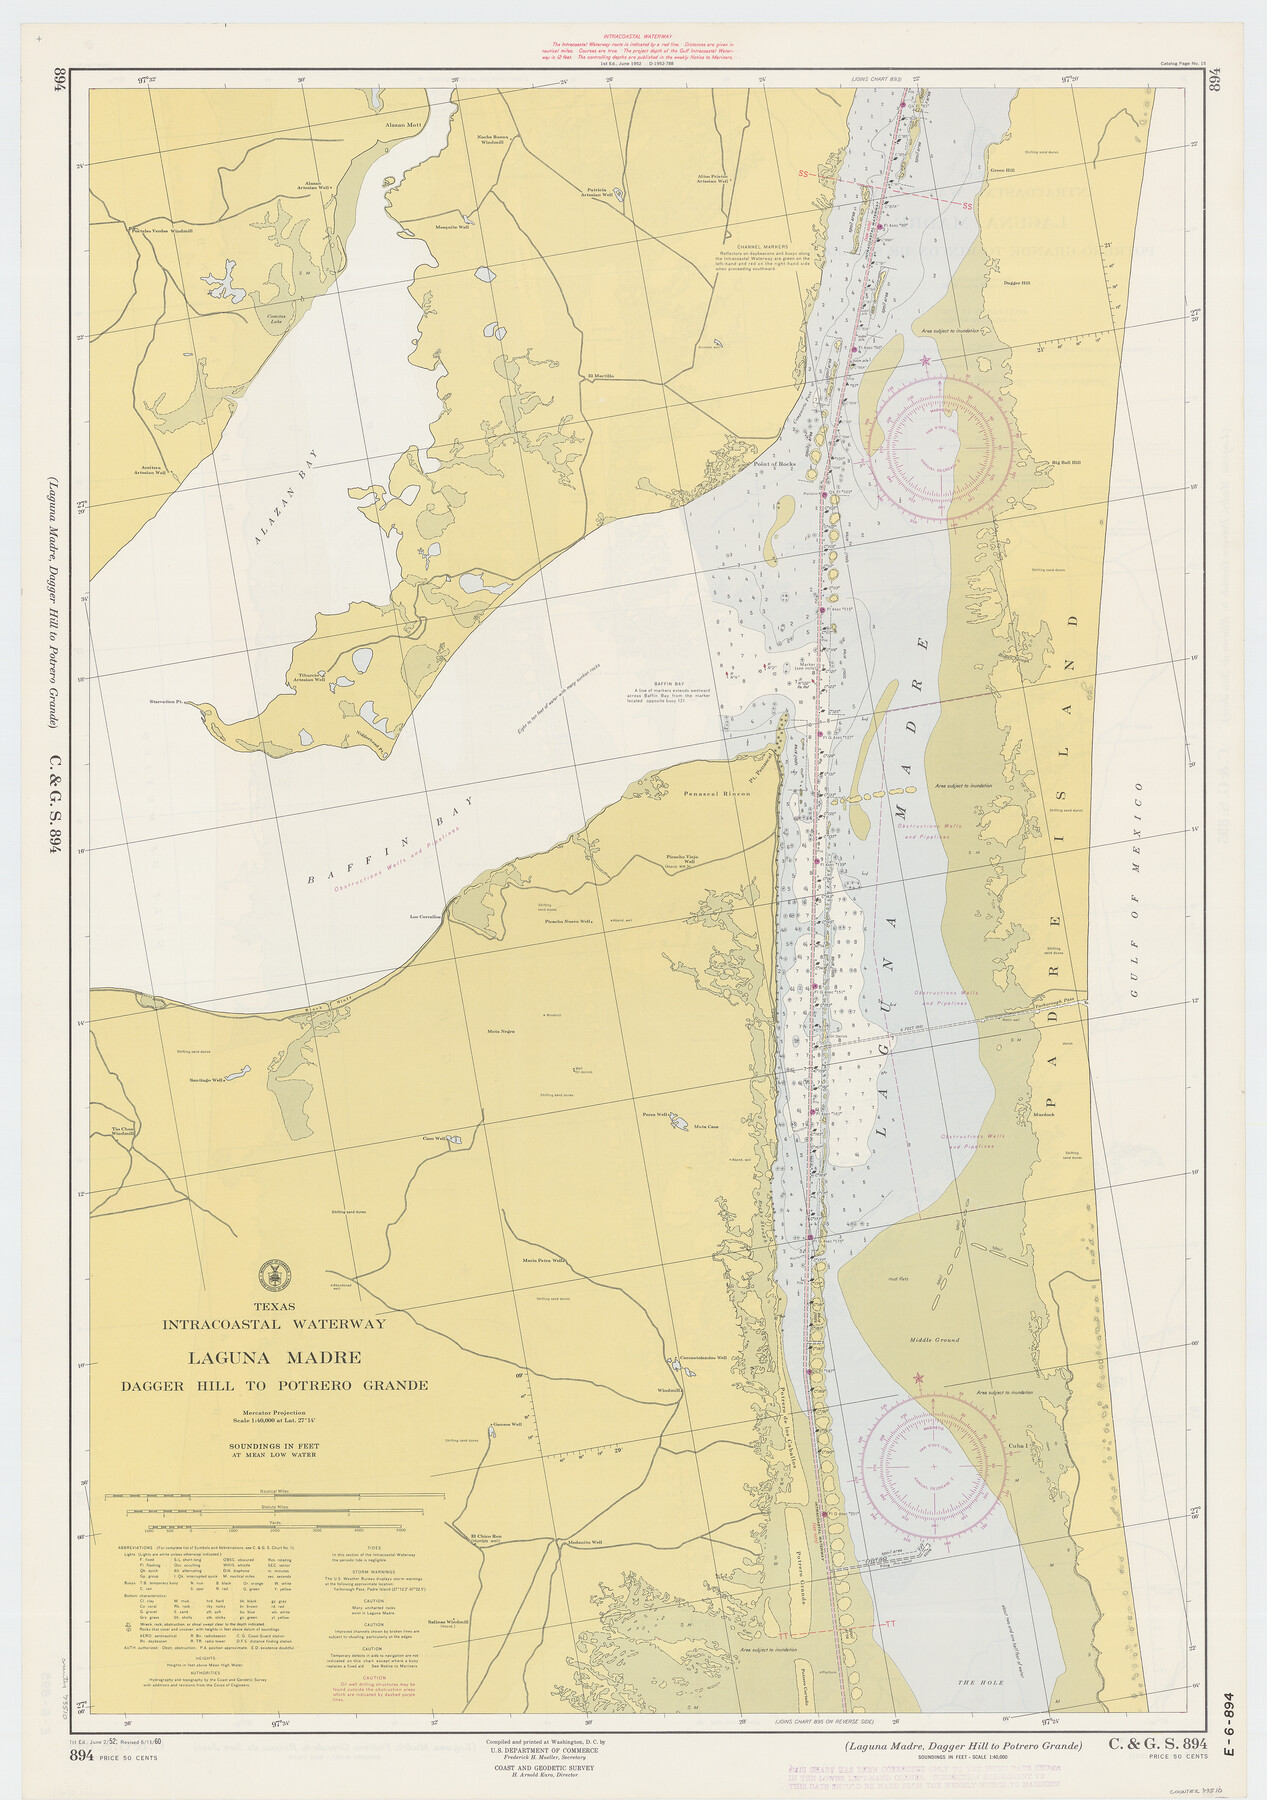 73510, Texas Intracoastal Waterway - Laguna Madre - Dagger Hill to Potrero Grande, General Map Collection